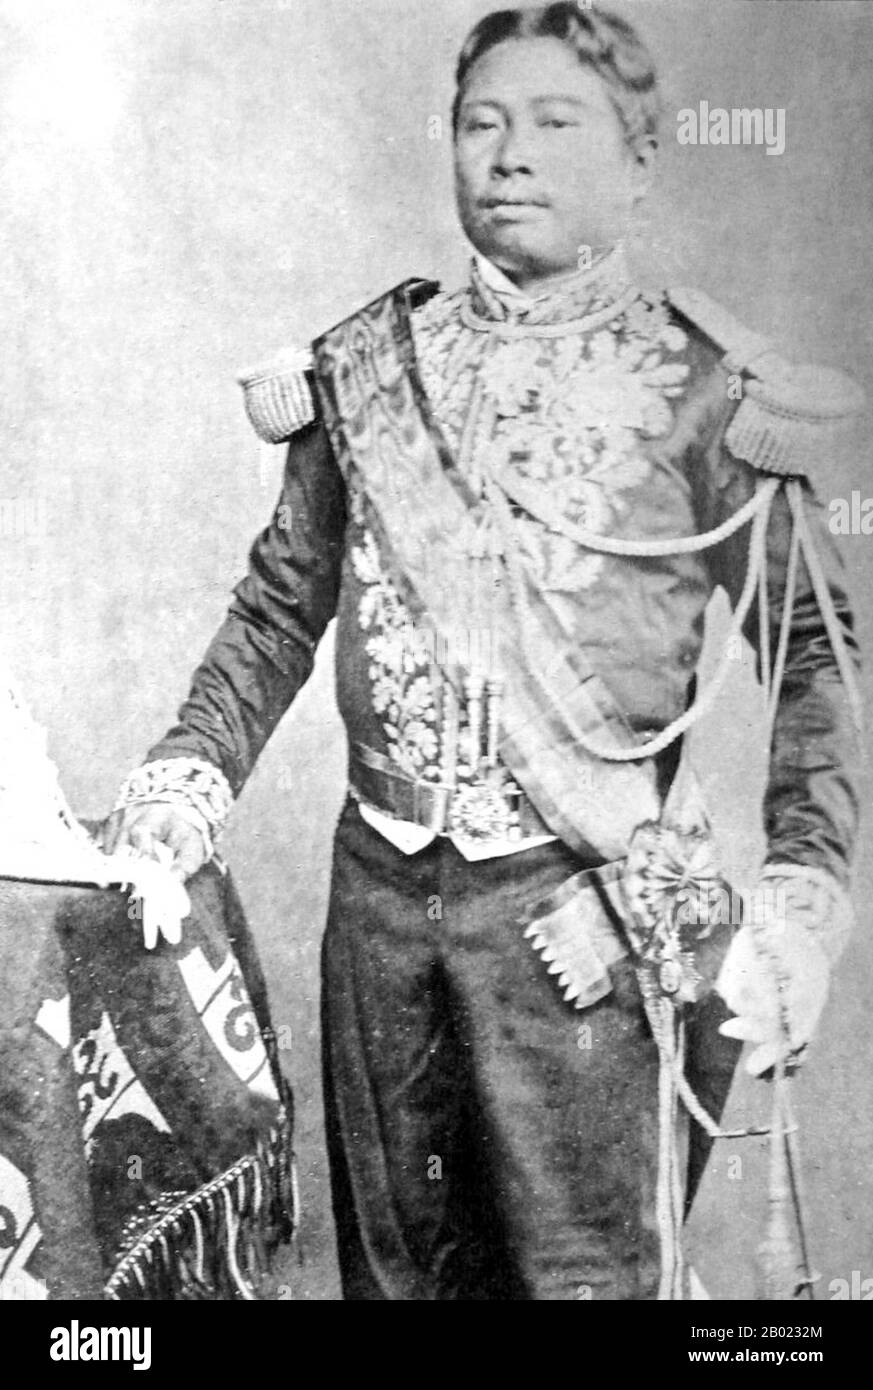 Norodom I ruled as king of Cambodia from 1860 to 1904. He was the eldest son of King Ang Duong, who ruled on behalf of Siam, and half-brother of Prince Si Votha as well as the half-brother of King Sisowath.  Norodom was considered to be the first modern Khmer king. He is credited with saving Cambodia from disappearing altogether. In 1863, to prevent the two powerful neighbours, Vietnam and Siam, from swallowing Cambodia altogether he invited France to make Cambodia its protectorate. Stock Photo